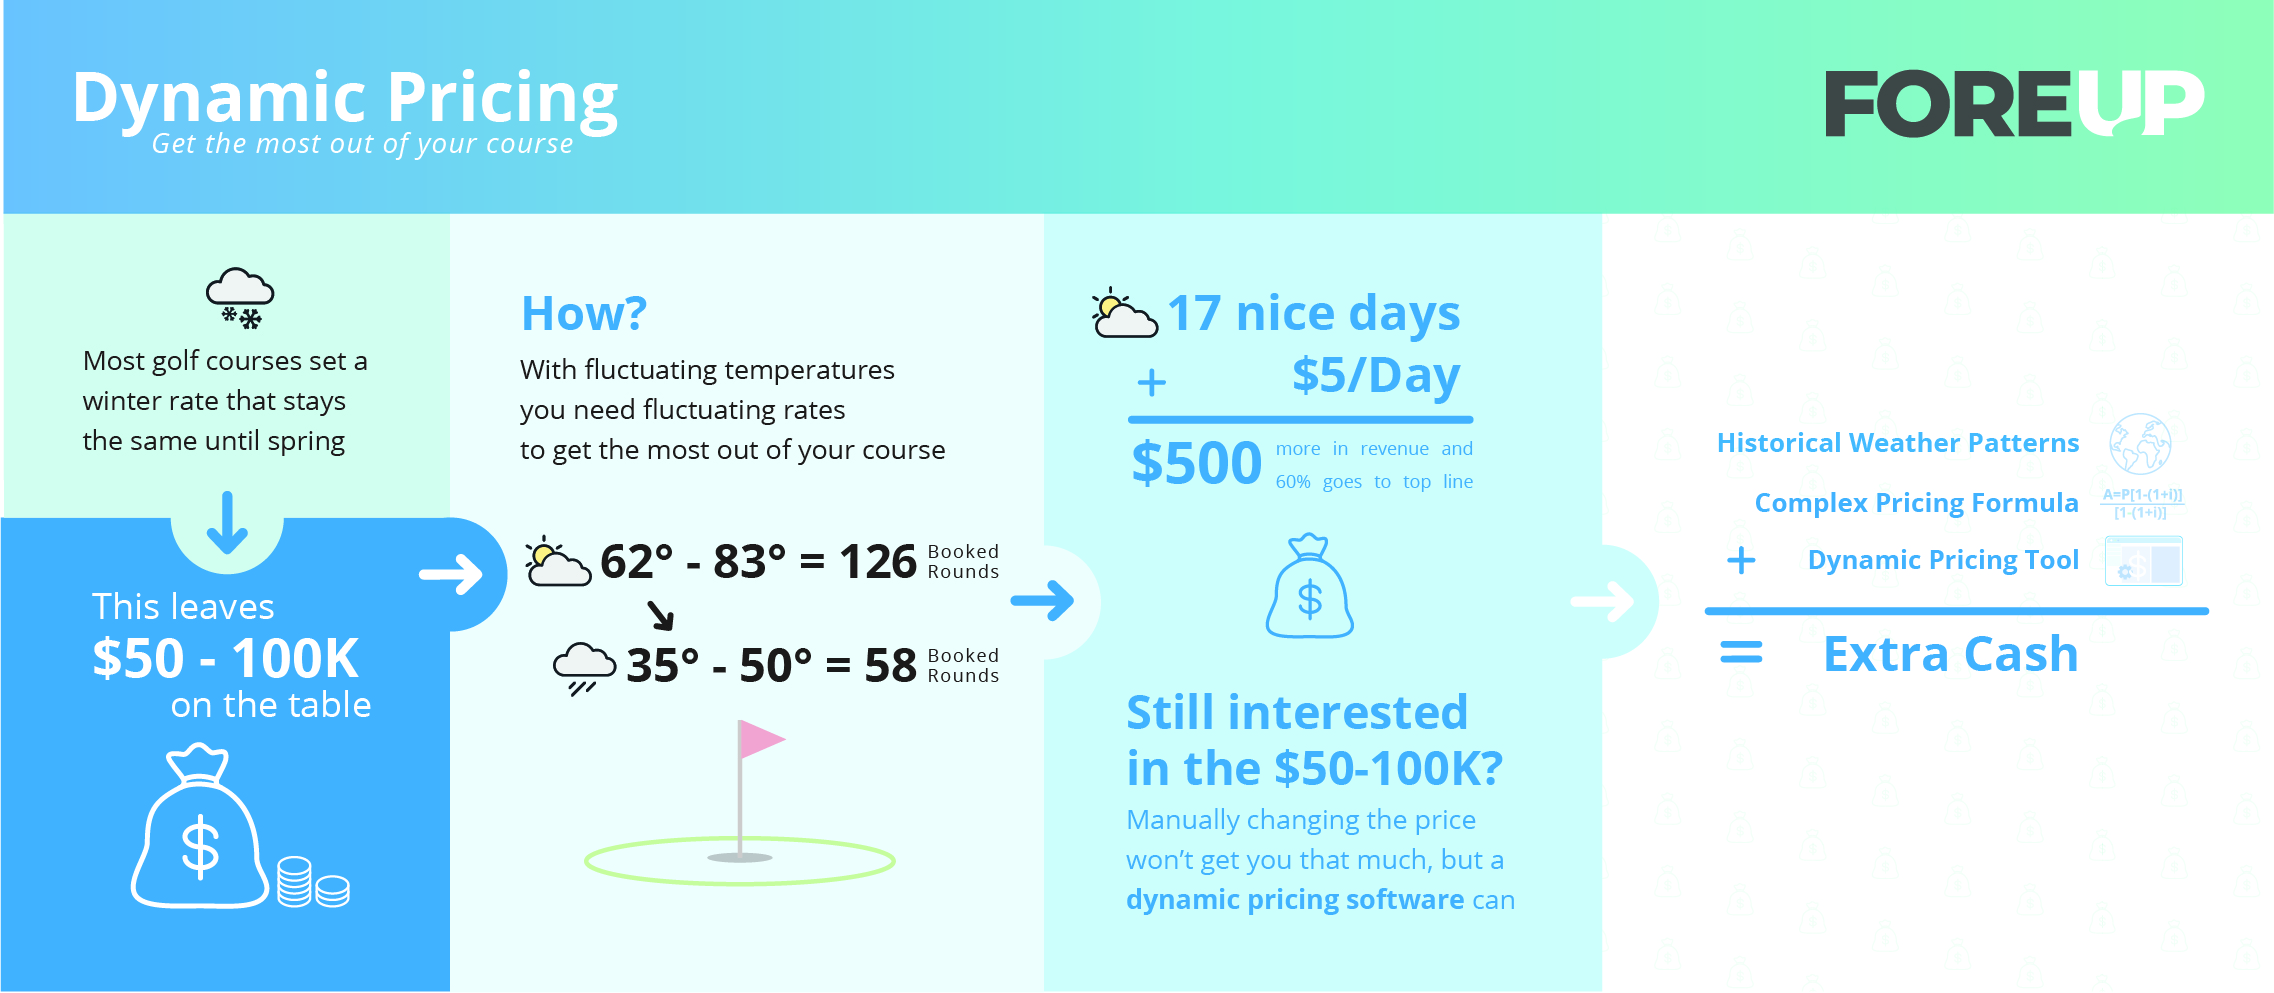 dynamicPricing_foreUP